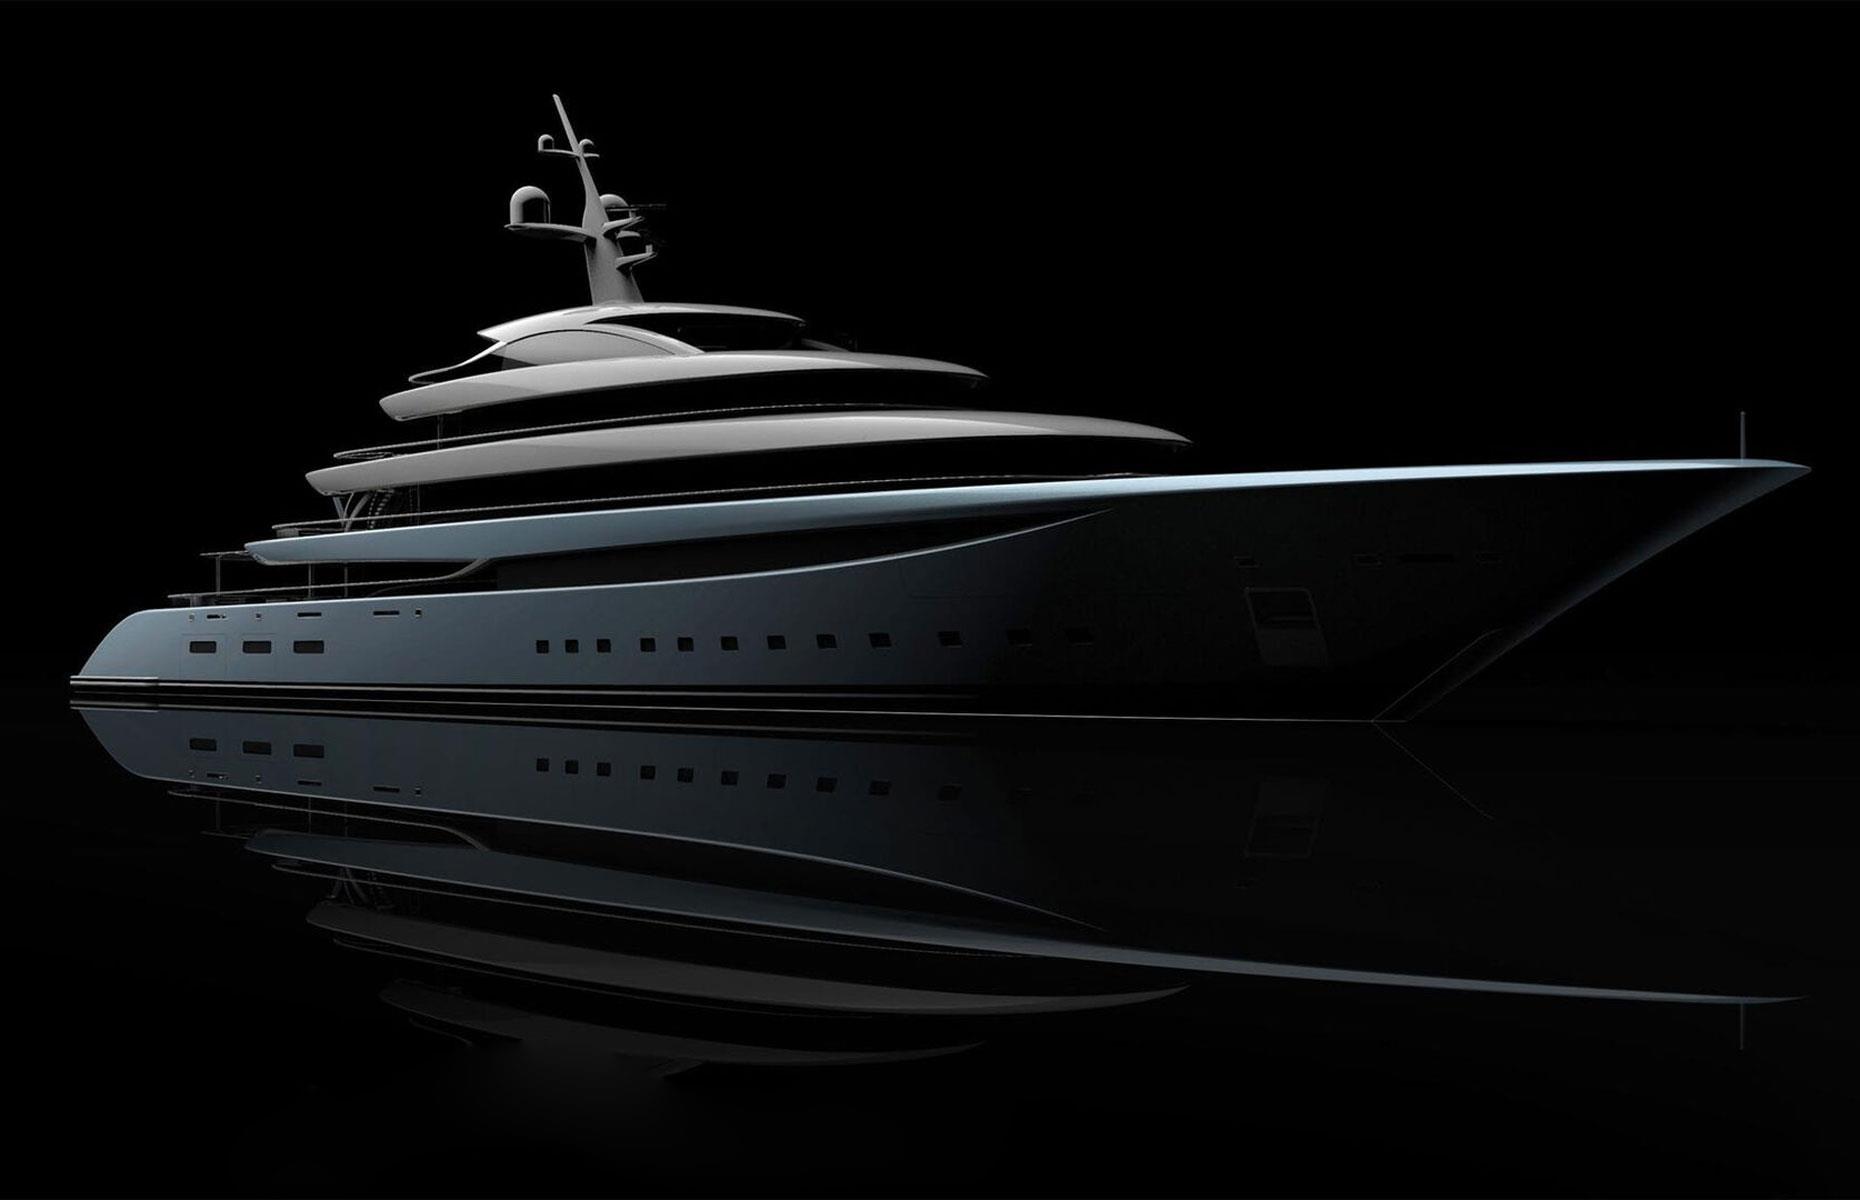 <p>Spanning 338 feet (103m), <em>Project JASSJ</em> is the third-largest of the show-stopping superyachts German shipbuilder Lürssen is delivering in 2024.</p>  <p>Sold in 2021 to an anonymous buyer for an undisclosed price, the superyacht features exterior and interior design by RWD Design. American firm Moran Yacht & Ship is overseeing the build.</p>